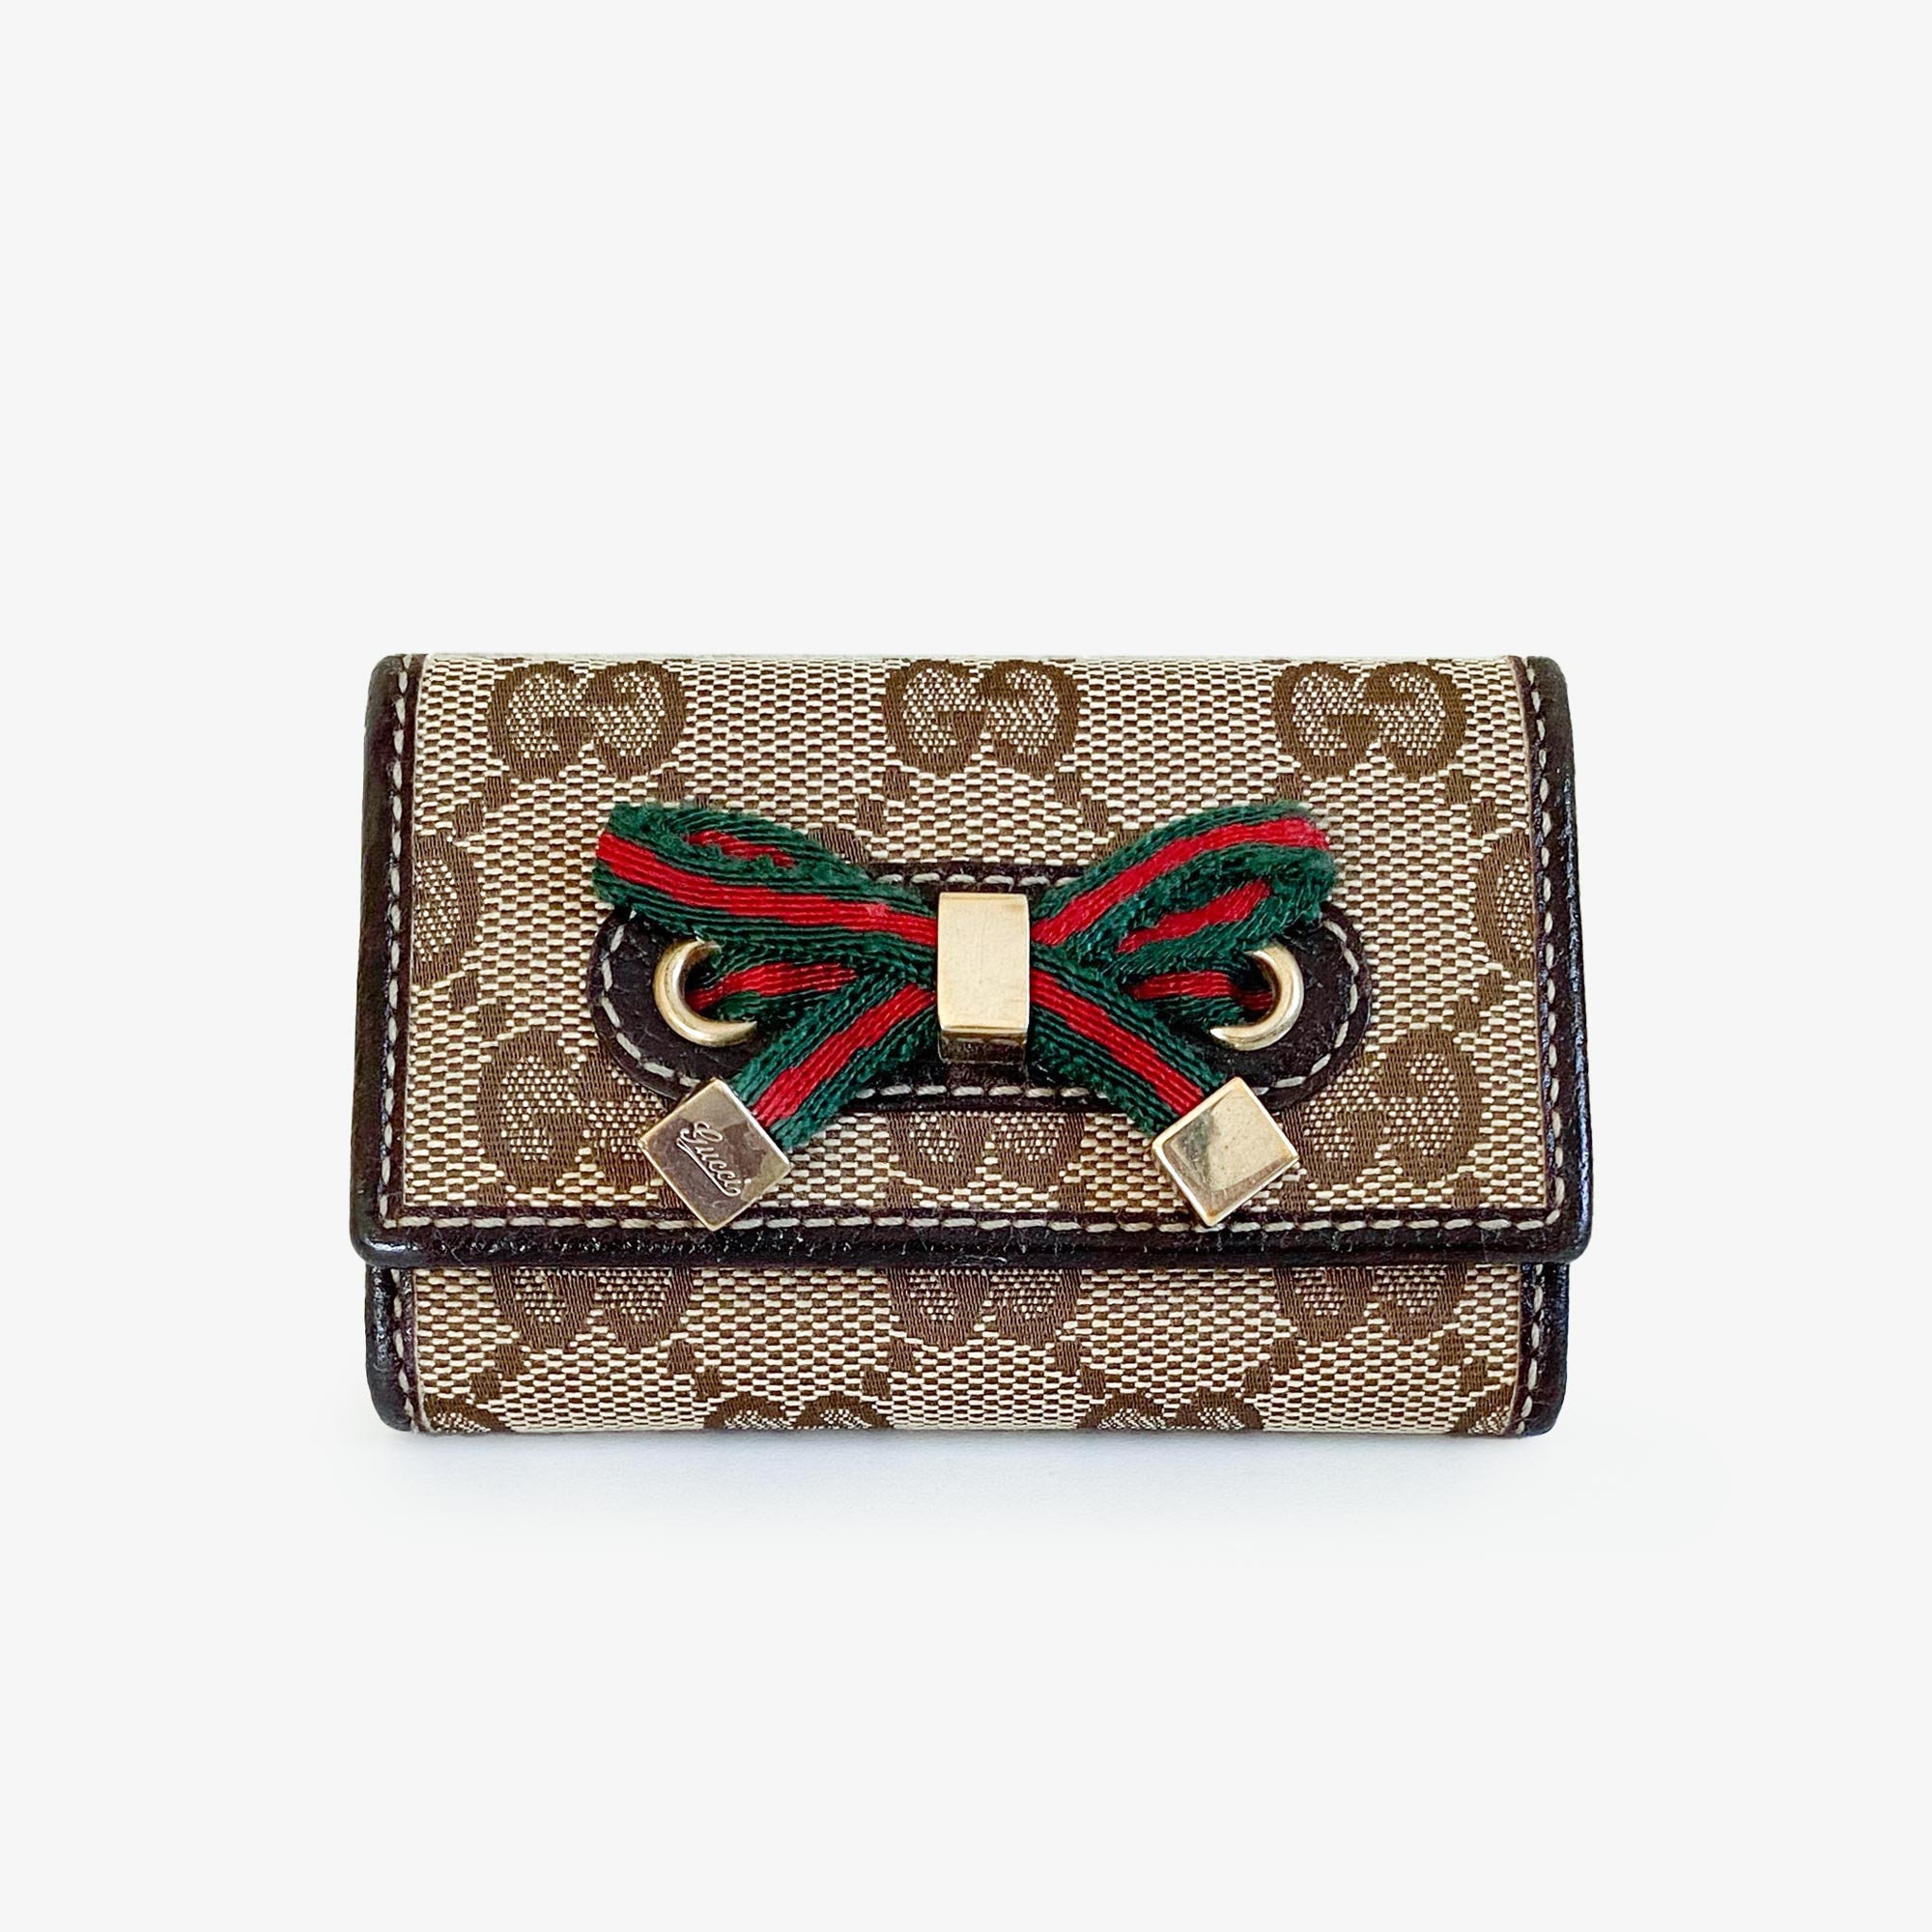 Gucci Ophidia Key Pouch GG Supreme Pouch - Neutrals Wallets, Accessories -  GUC1354106